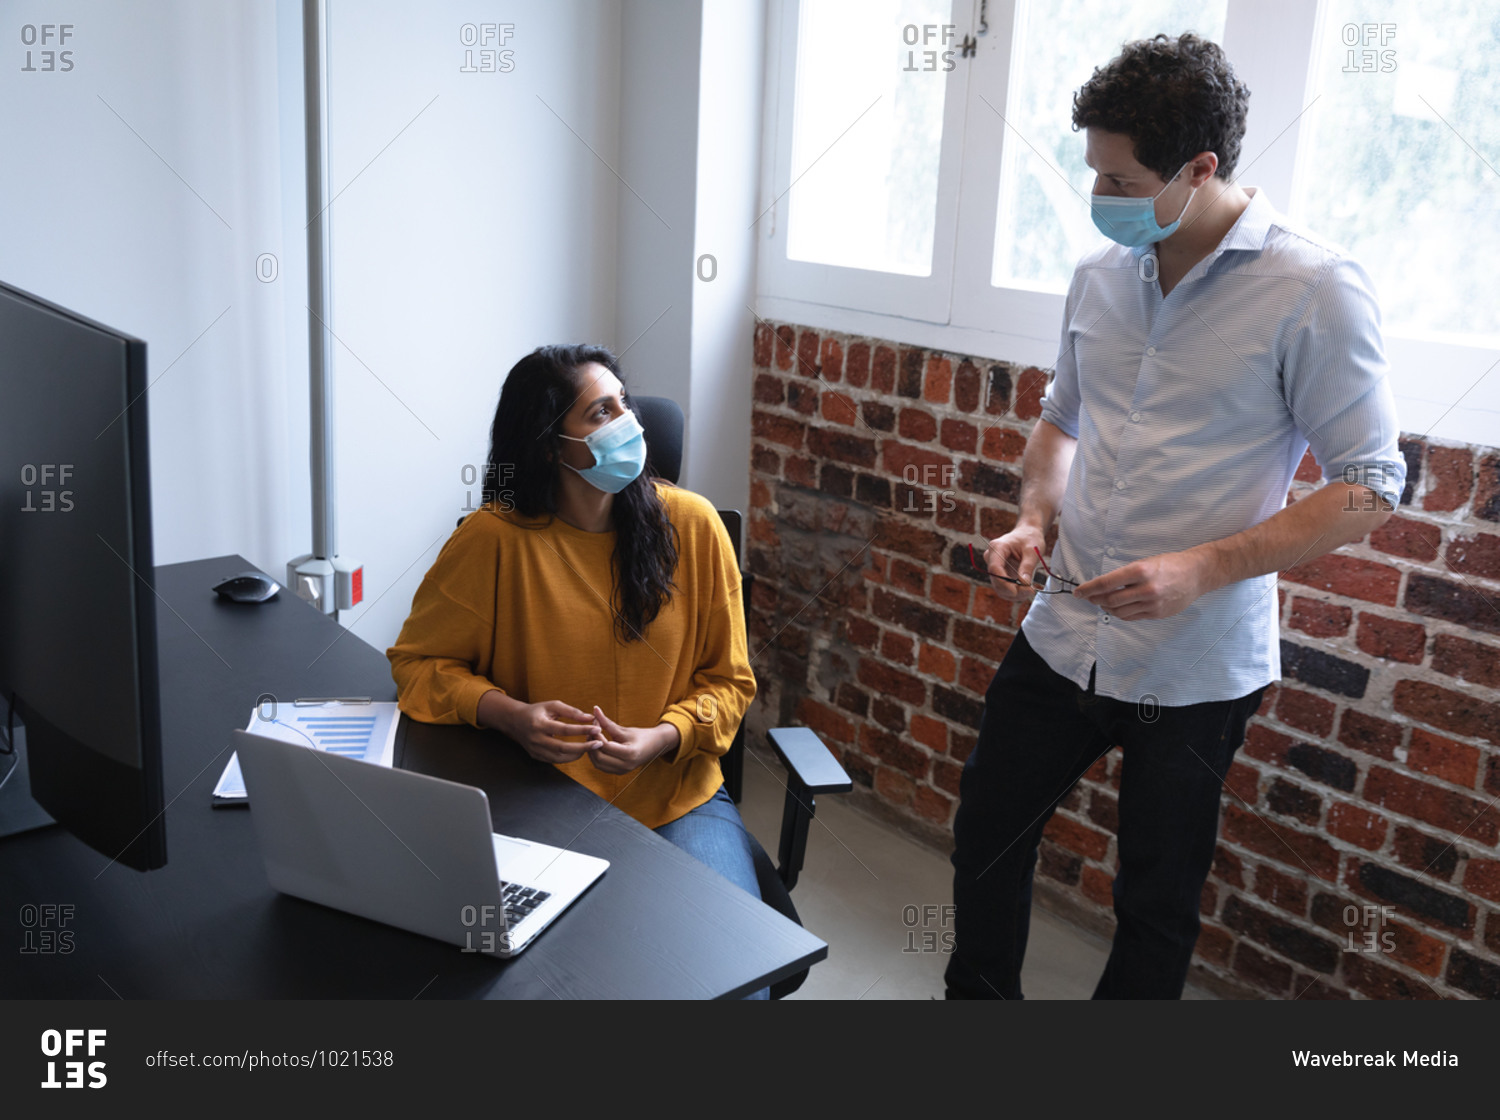 Mixed race woman and Caucasian man working in a casual office, wearing face masks and talking. Social distancing in the workplace during Coronavirus Covid 19 pandemic.